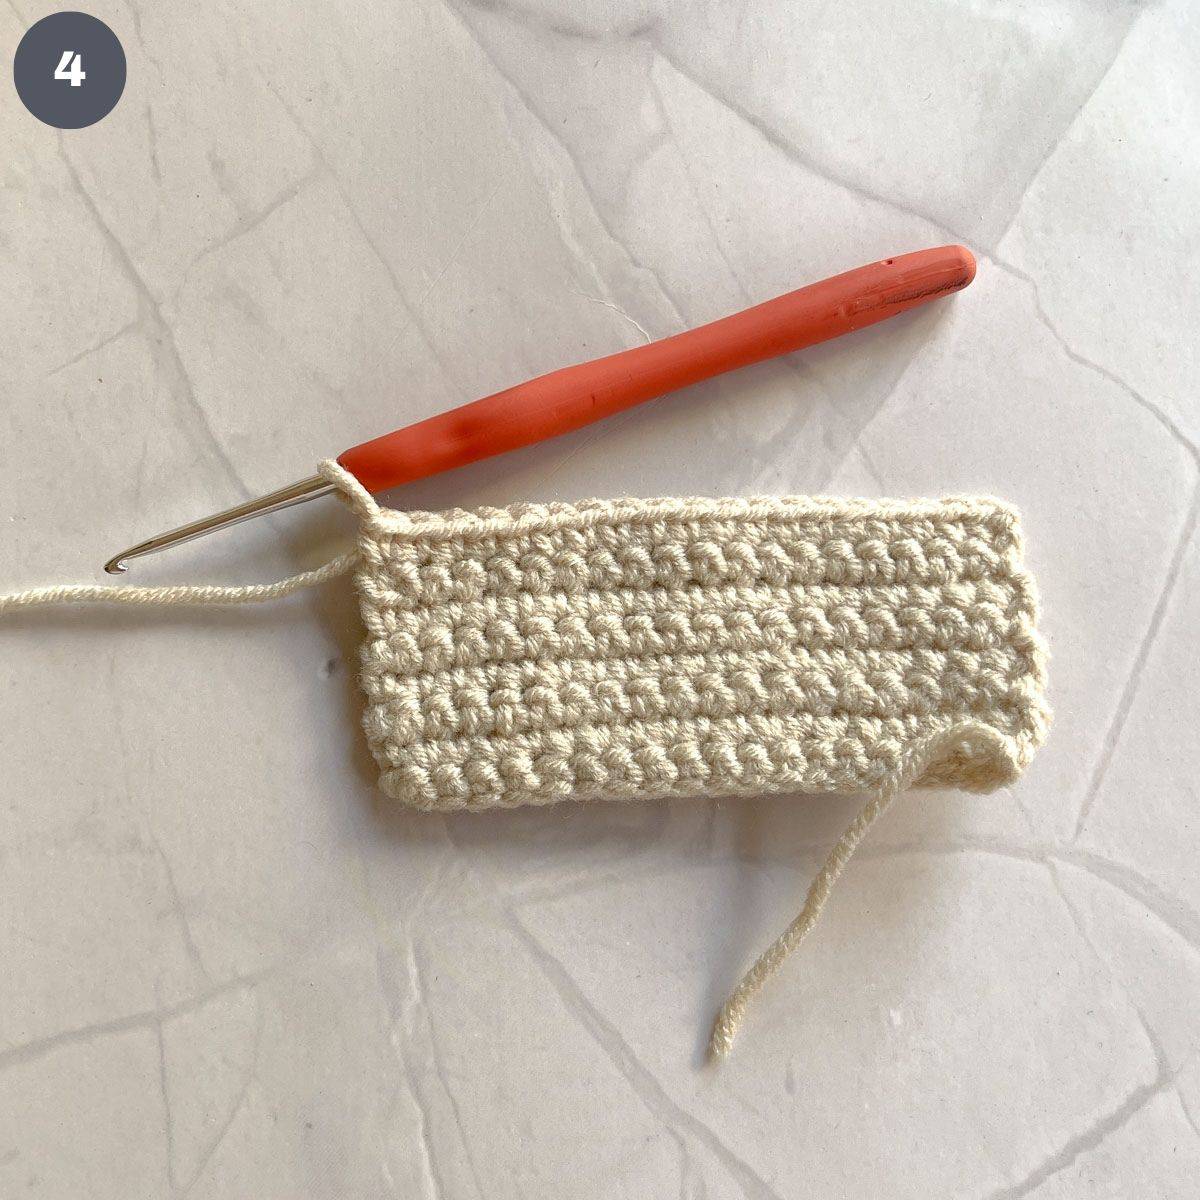 A rectangle crochet piece with hook attached to it.